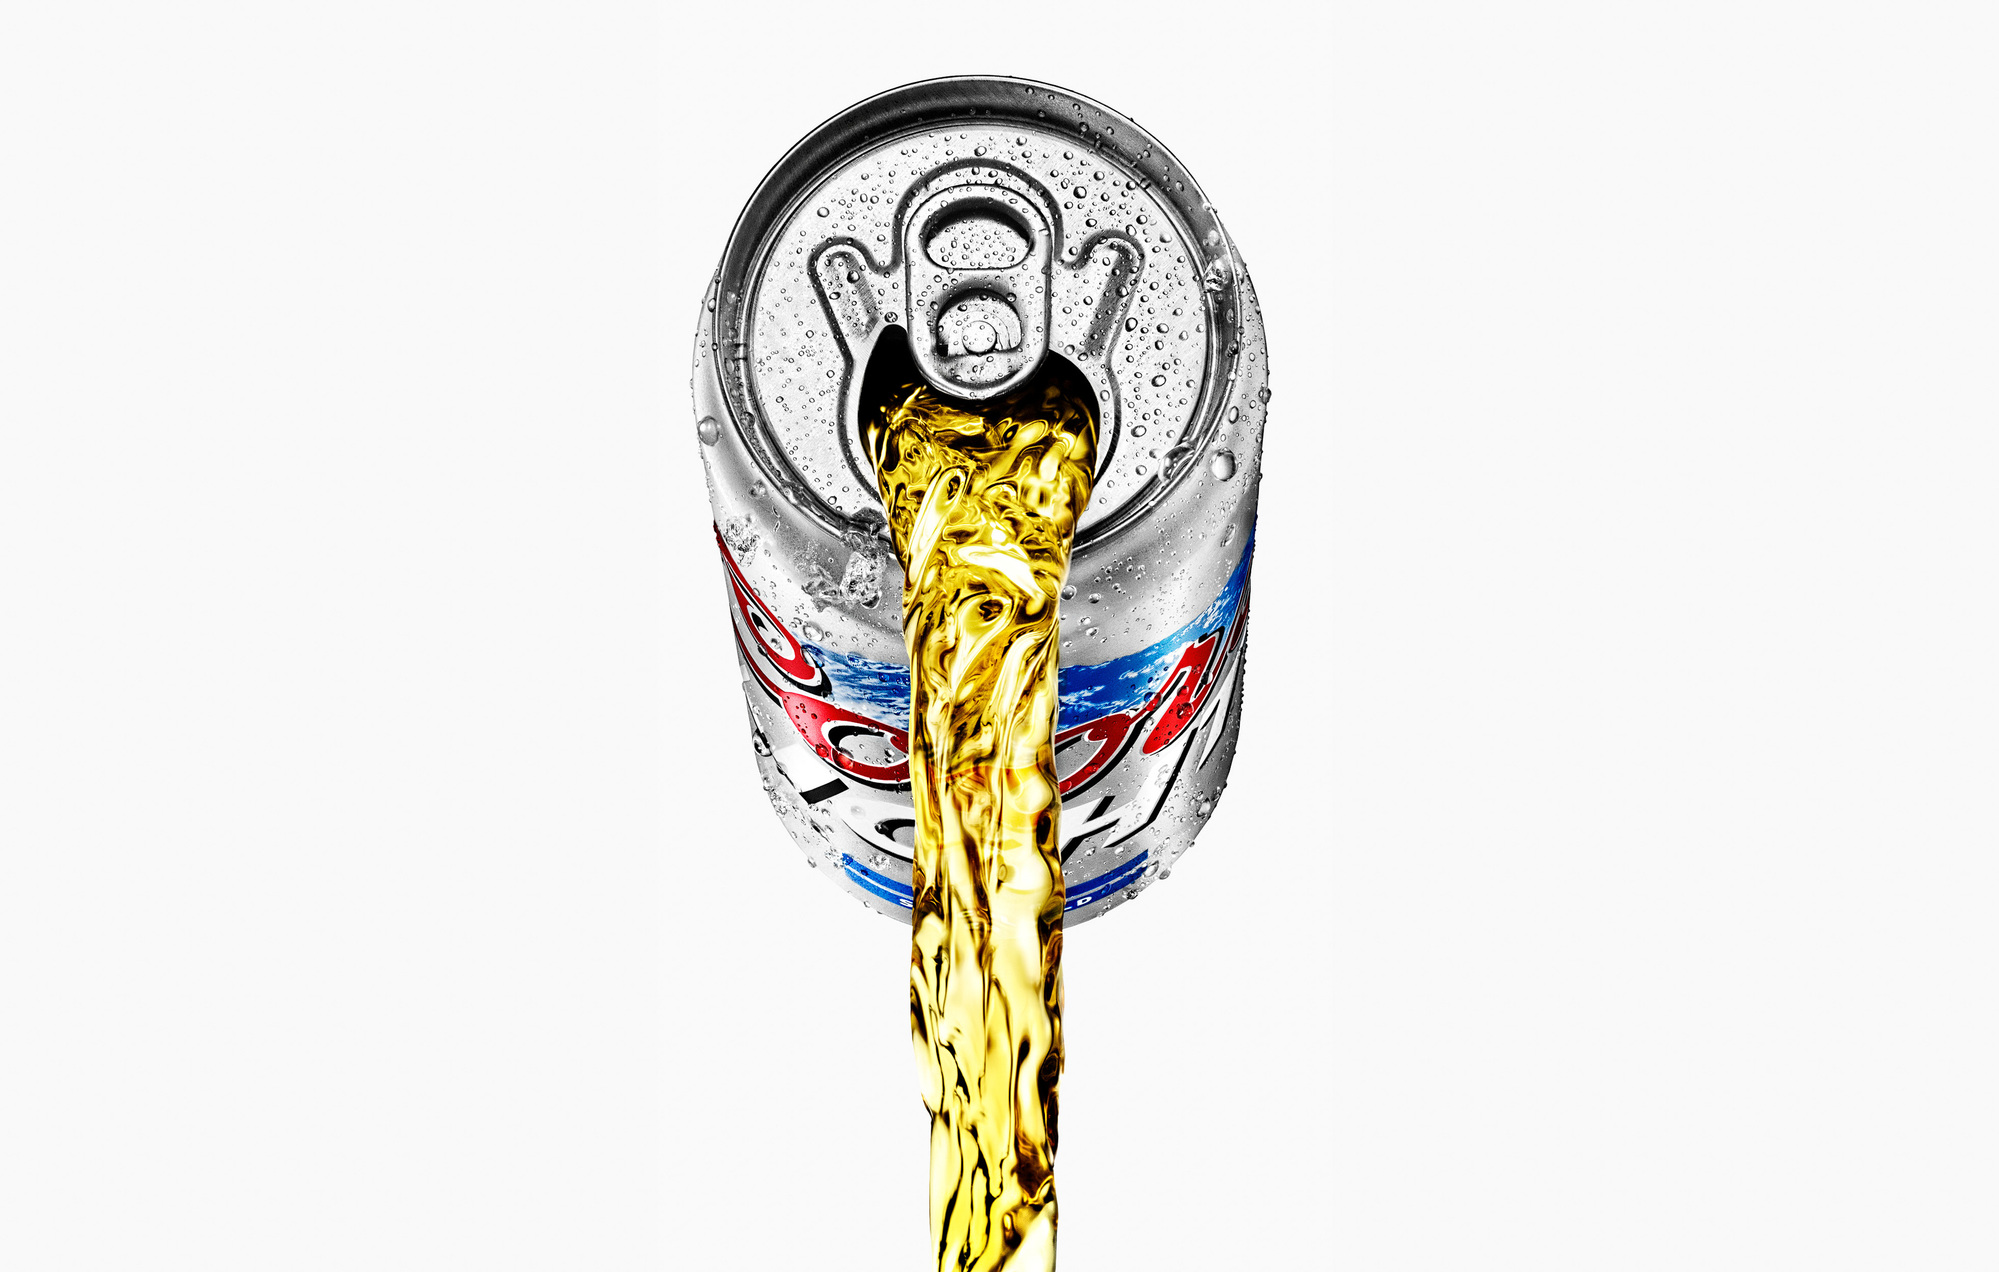 Coors Light Beer can pour. Beverage & Liquor product advertising photography by Timothy Hogan Studio in Los Angeles